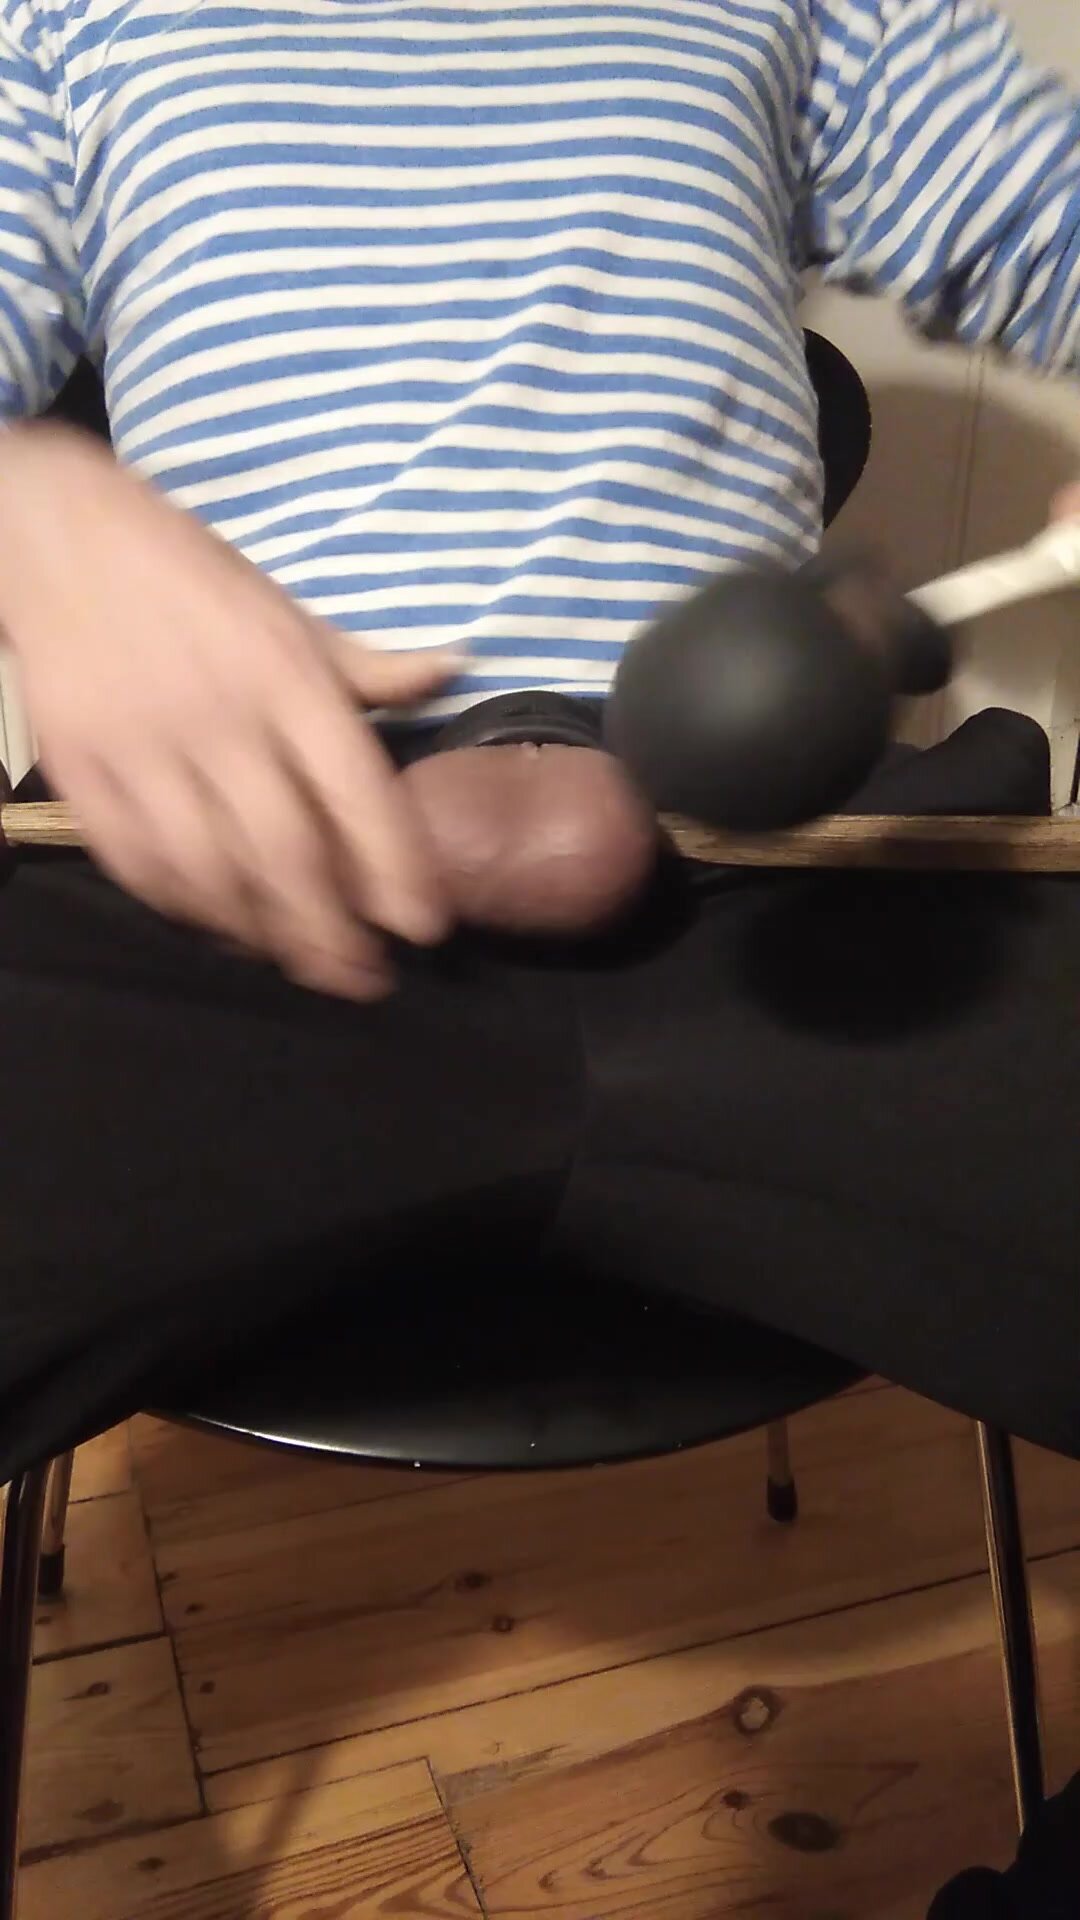 Warm up tonight with a big black rubber ball